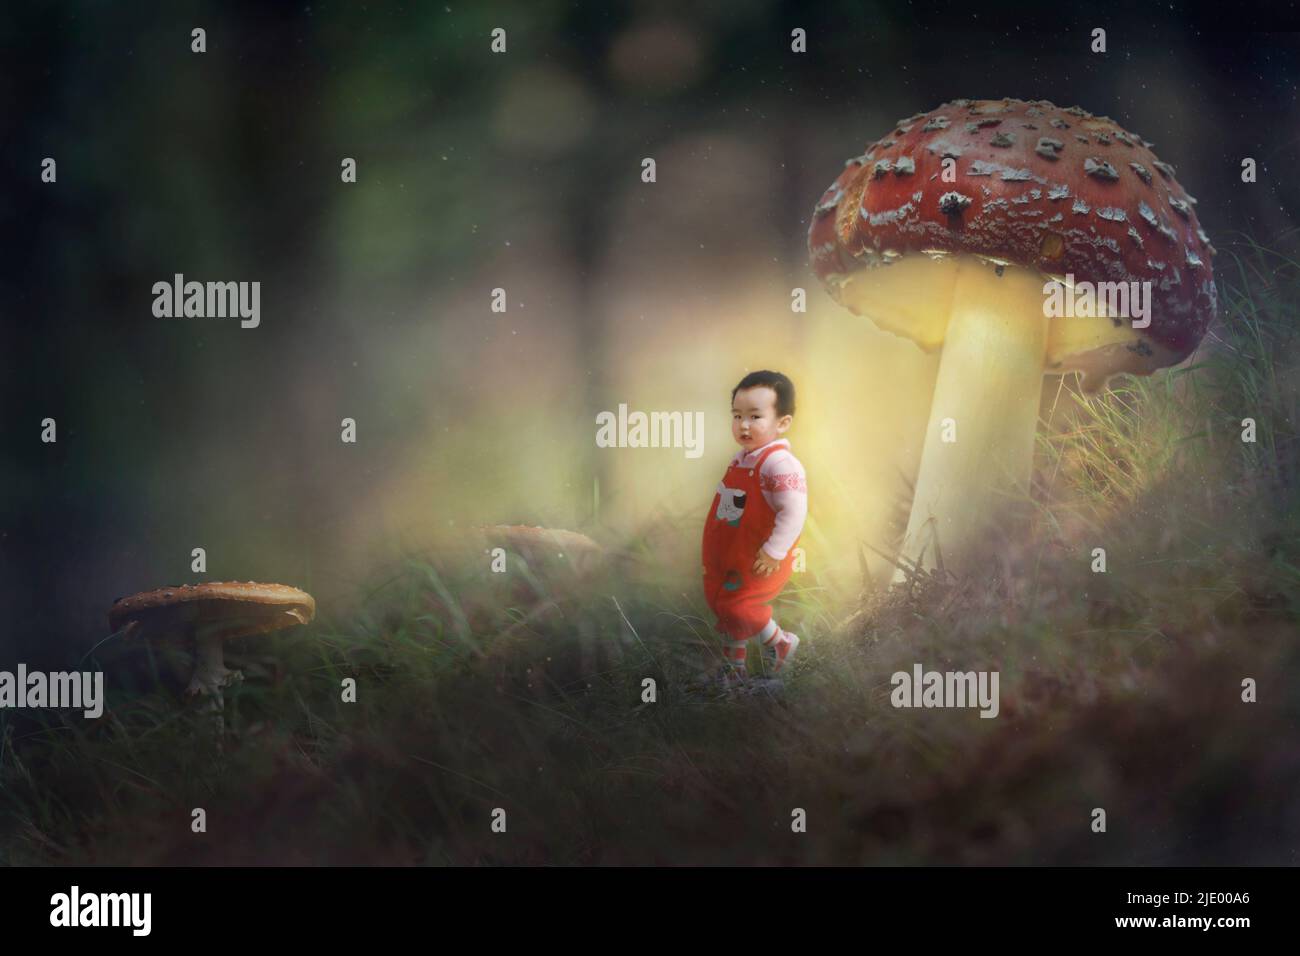 Composite image of a boy walking under glowing mushrooms in the forest. A fantasy fairy-tale image. Stock Photo